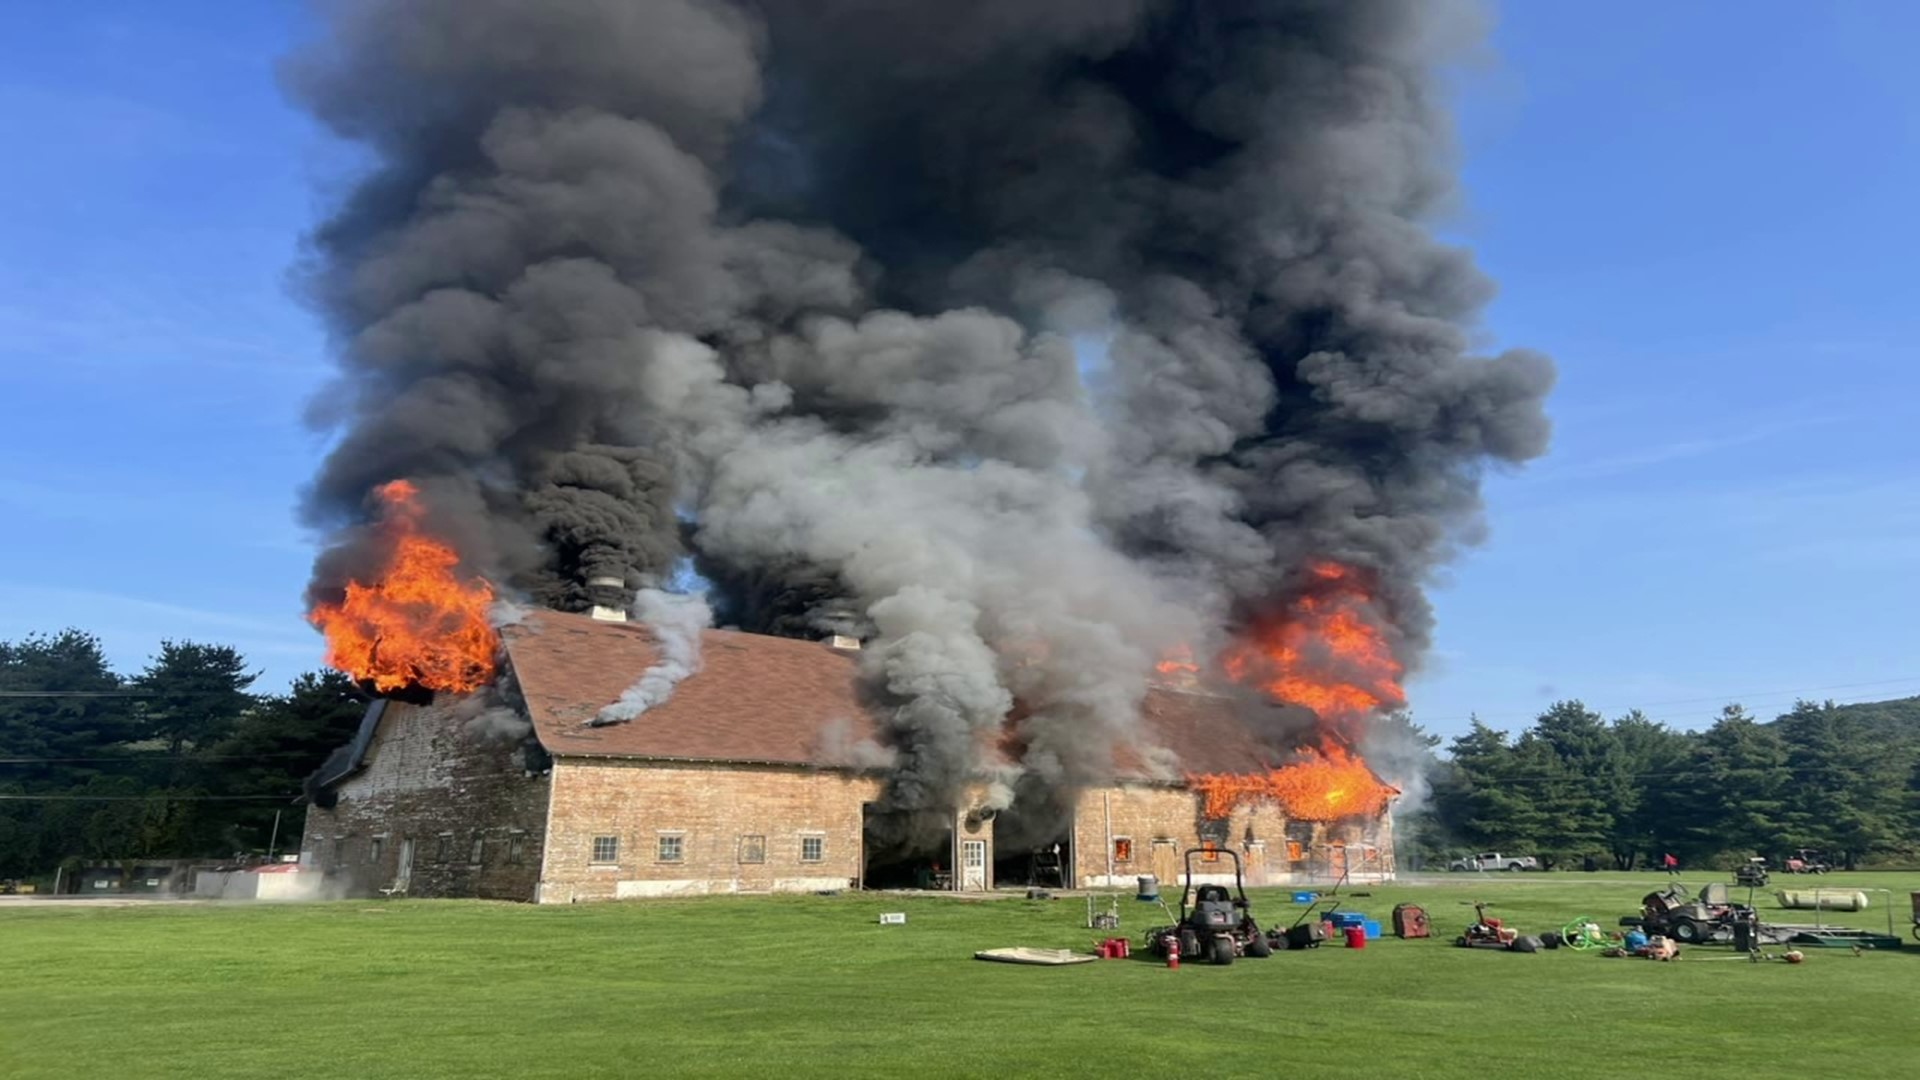 Investigators are working to determine what sparked the fire at a building on the property of a former resort in Wyoming County.